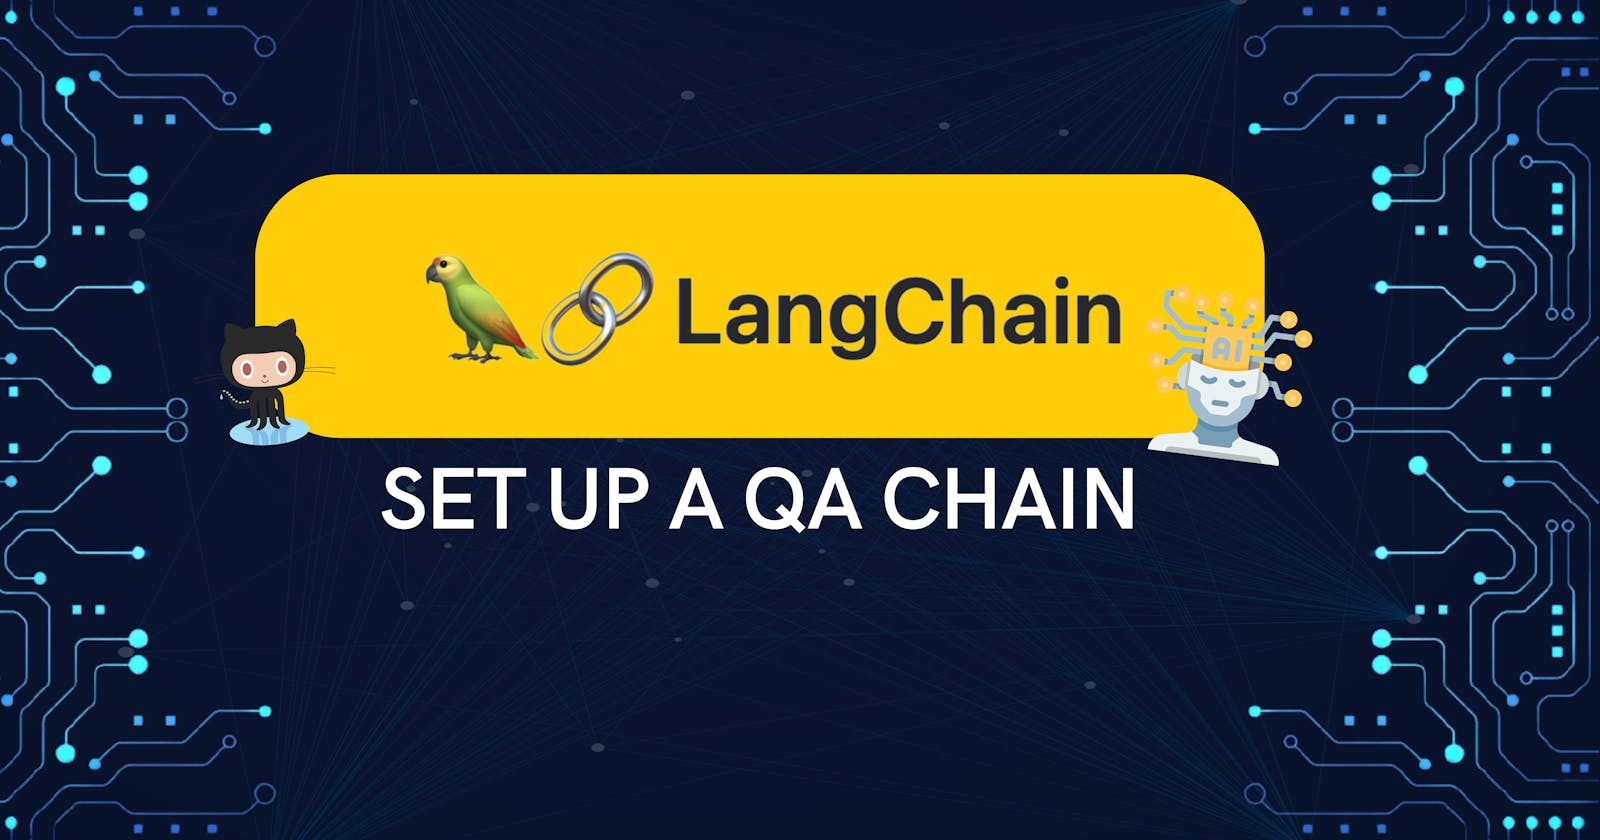 The ultimate LangChain series — chat with your data